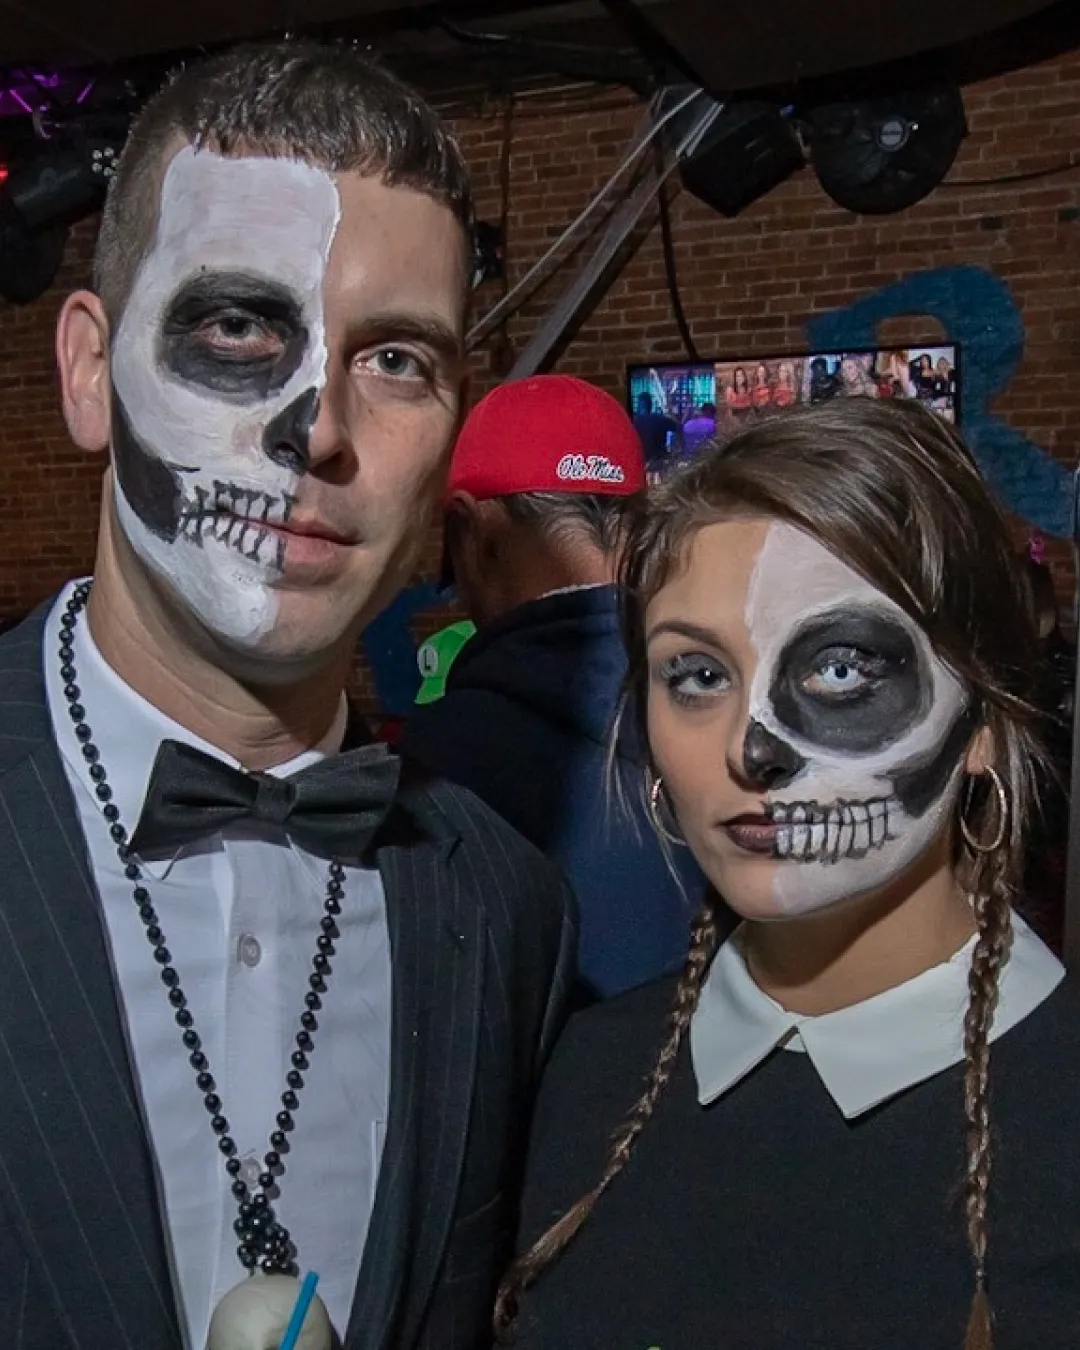 In the heart of the bar's energetic atmosphere, a couple united in their halloween makeup stand out, weaving spookiness with every move
